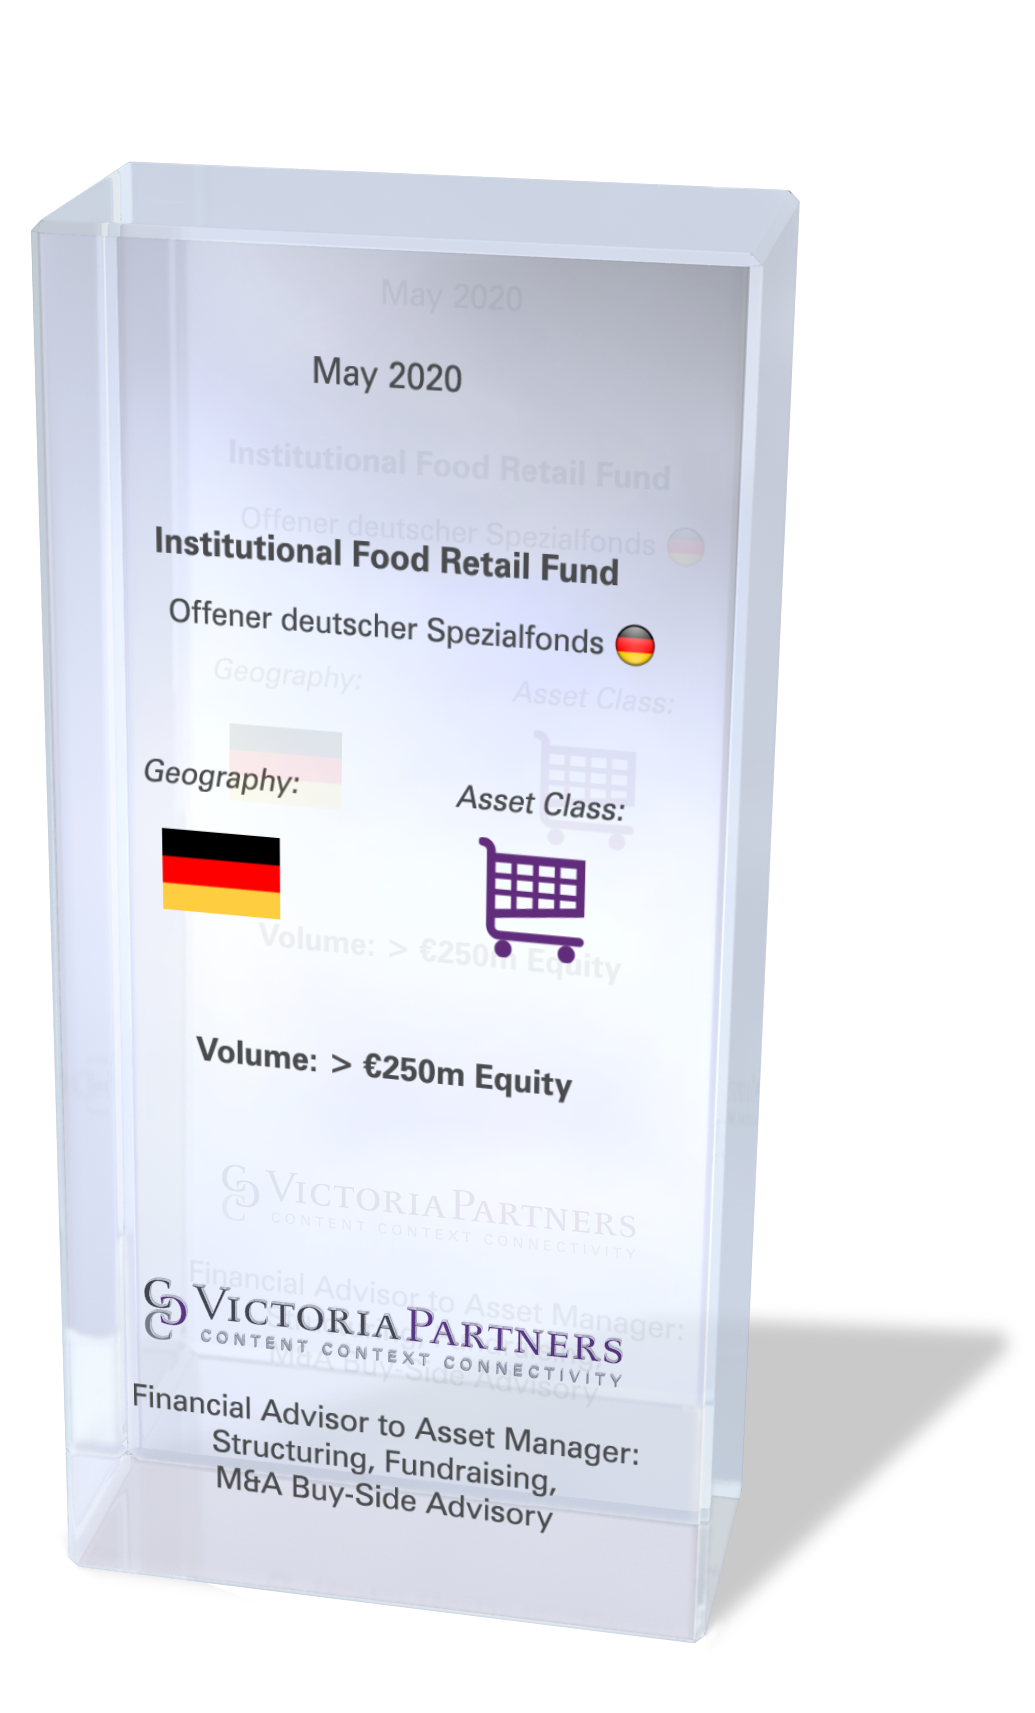 VICTORIAPARTNERS - Financial Advisor to Asset Manager: Structuring, Fundraising, M&A Buy-Side Advisory in Deutschland- May 2020